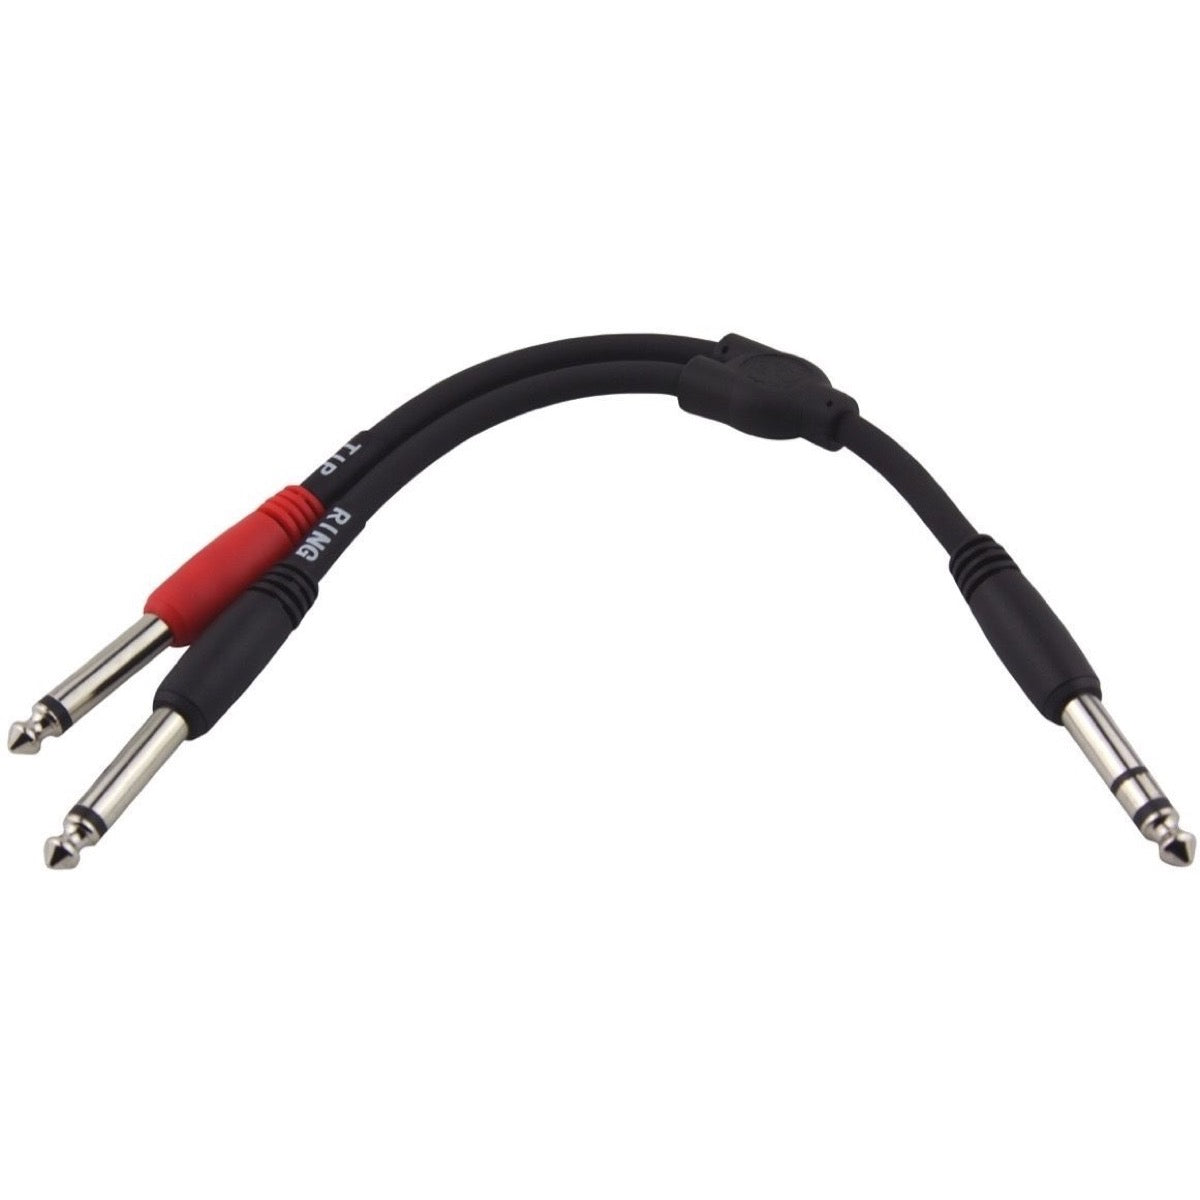 Pig Hog 1/4 Inch TRS to Dual 1/4 Inch Mono Y-Cable, 6 Inch